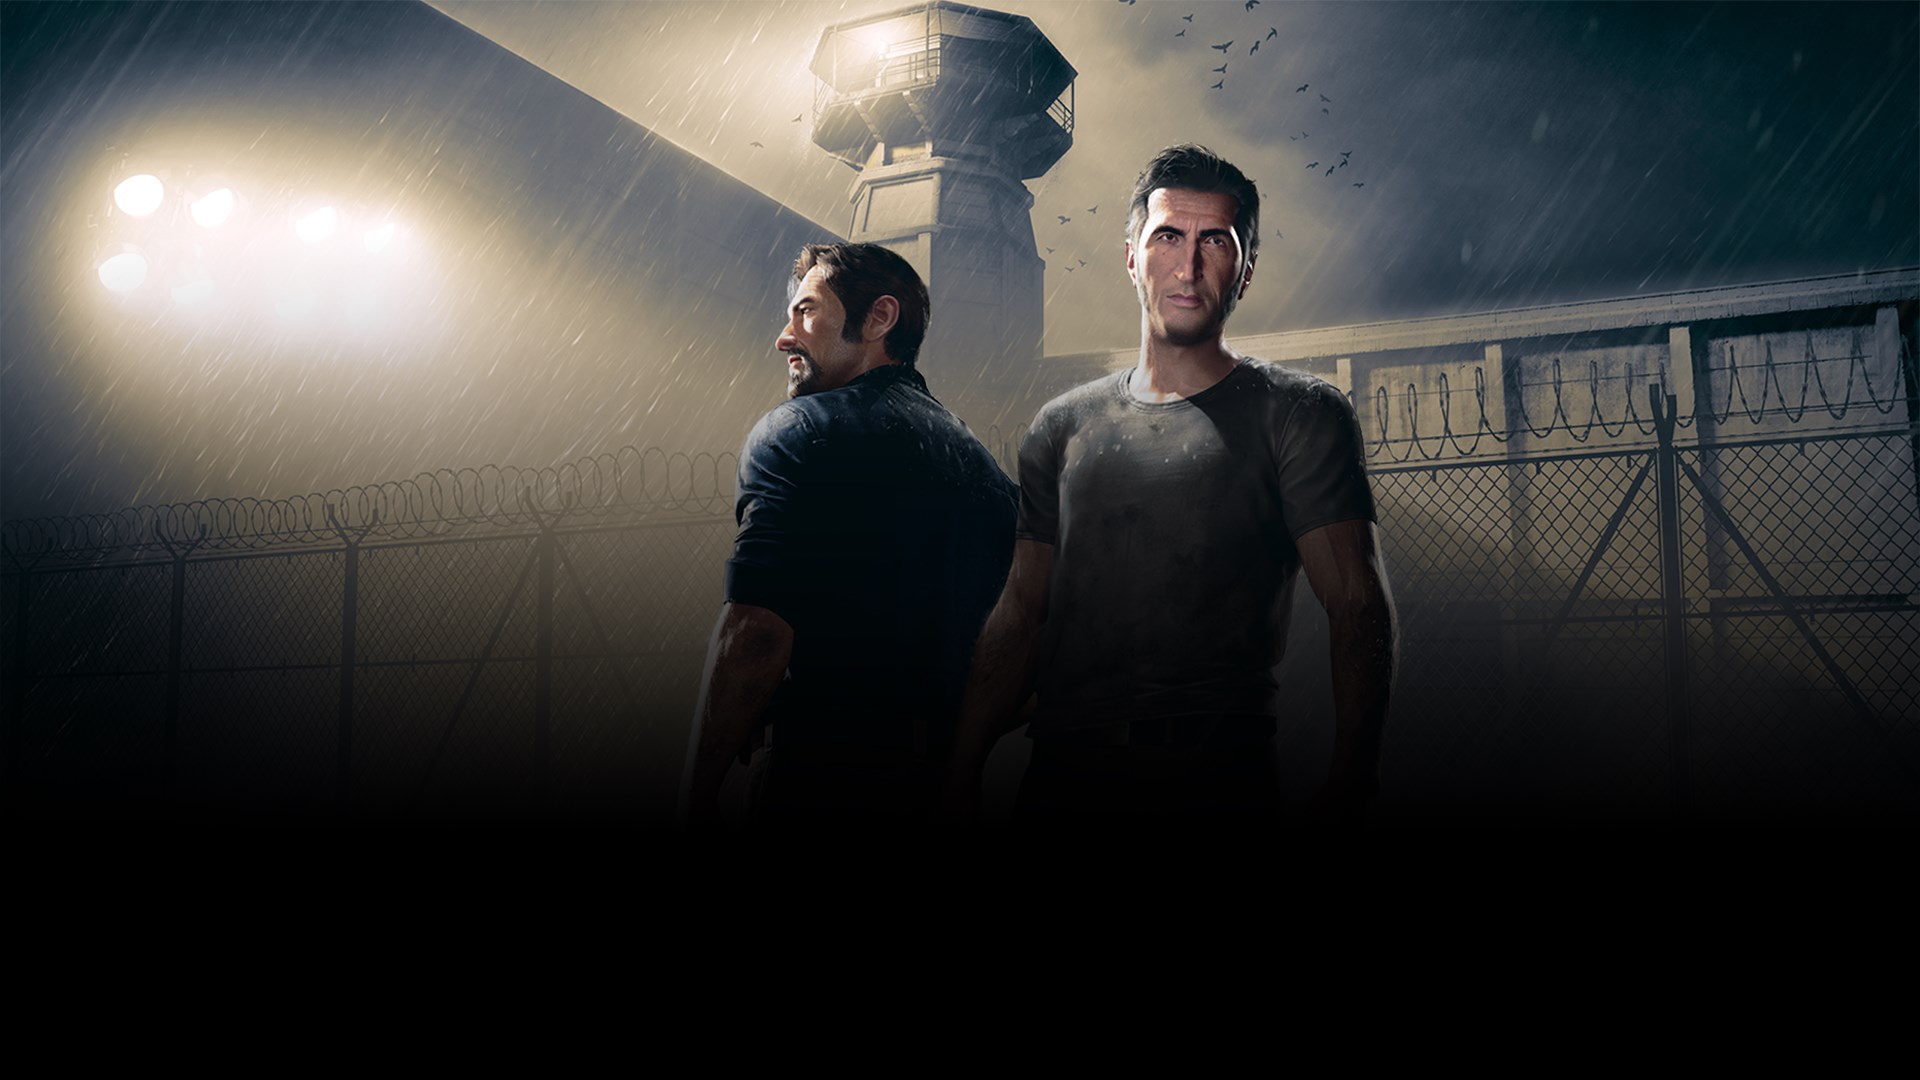 xbox store a way out